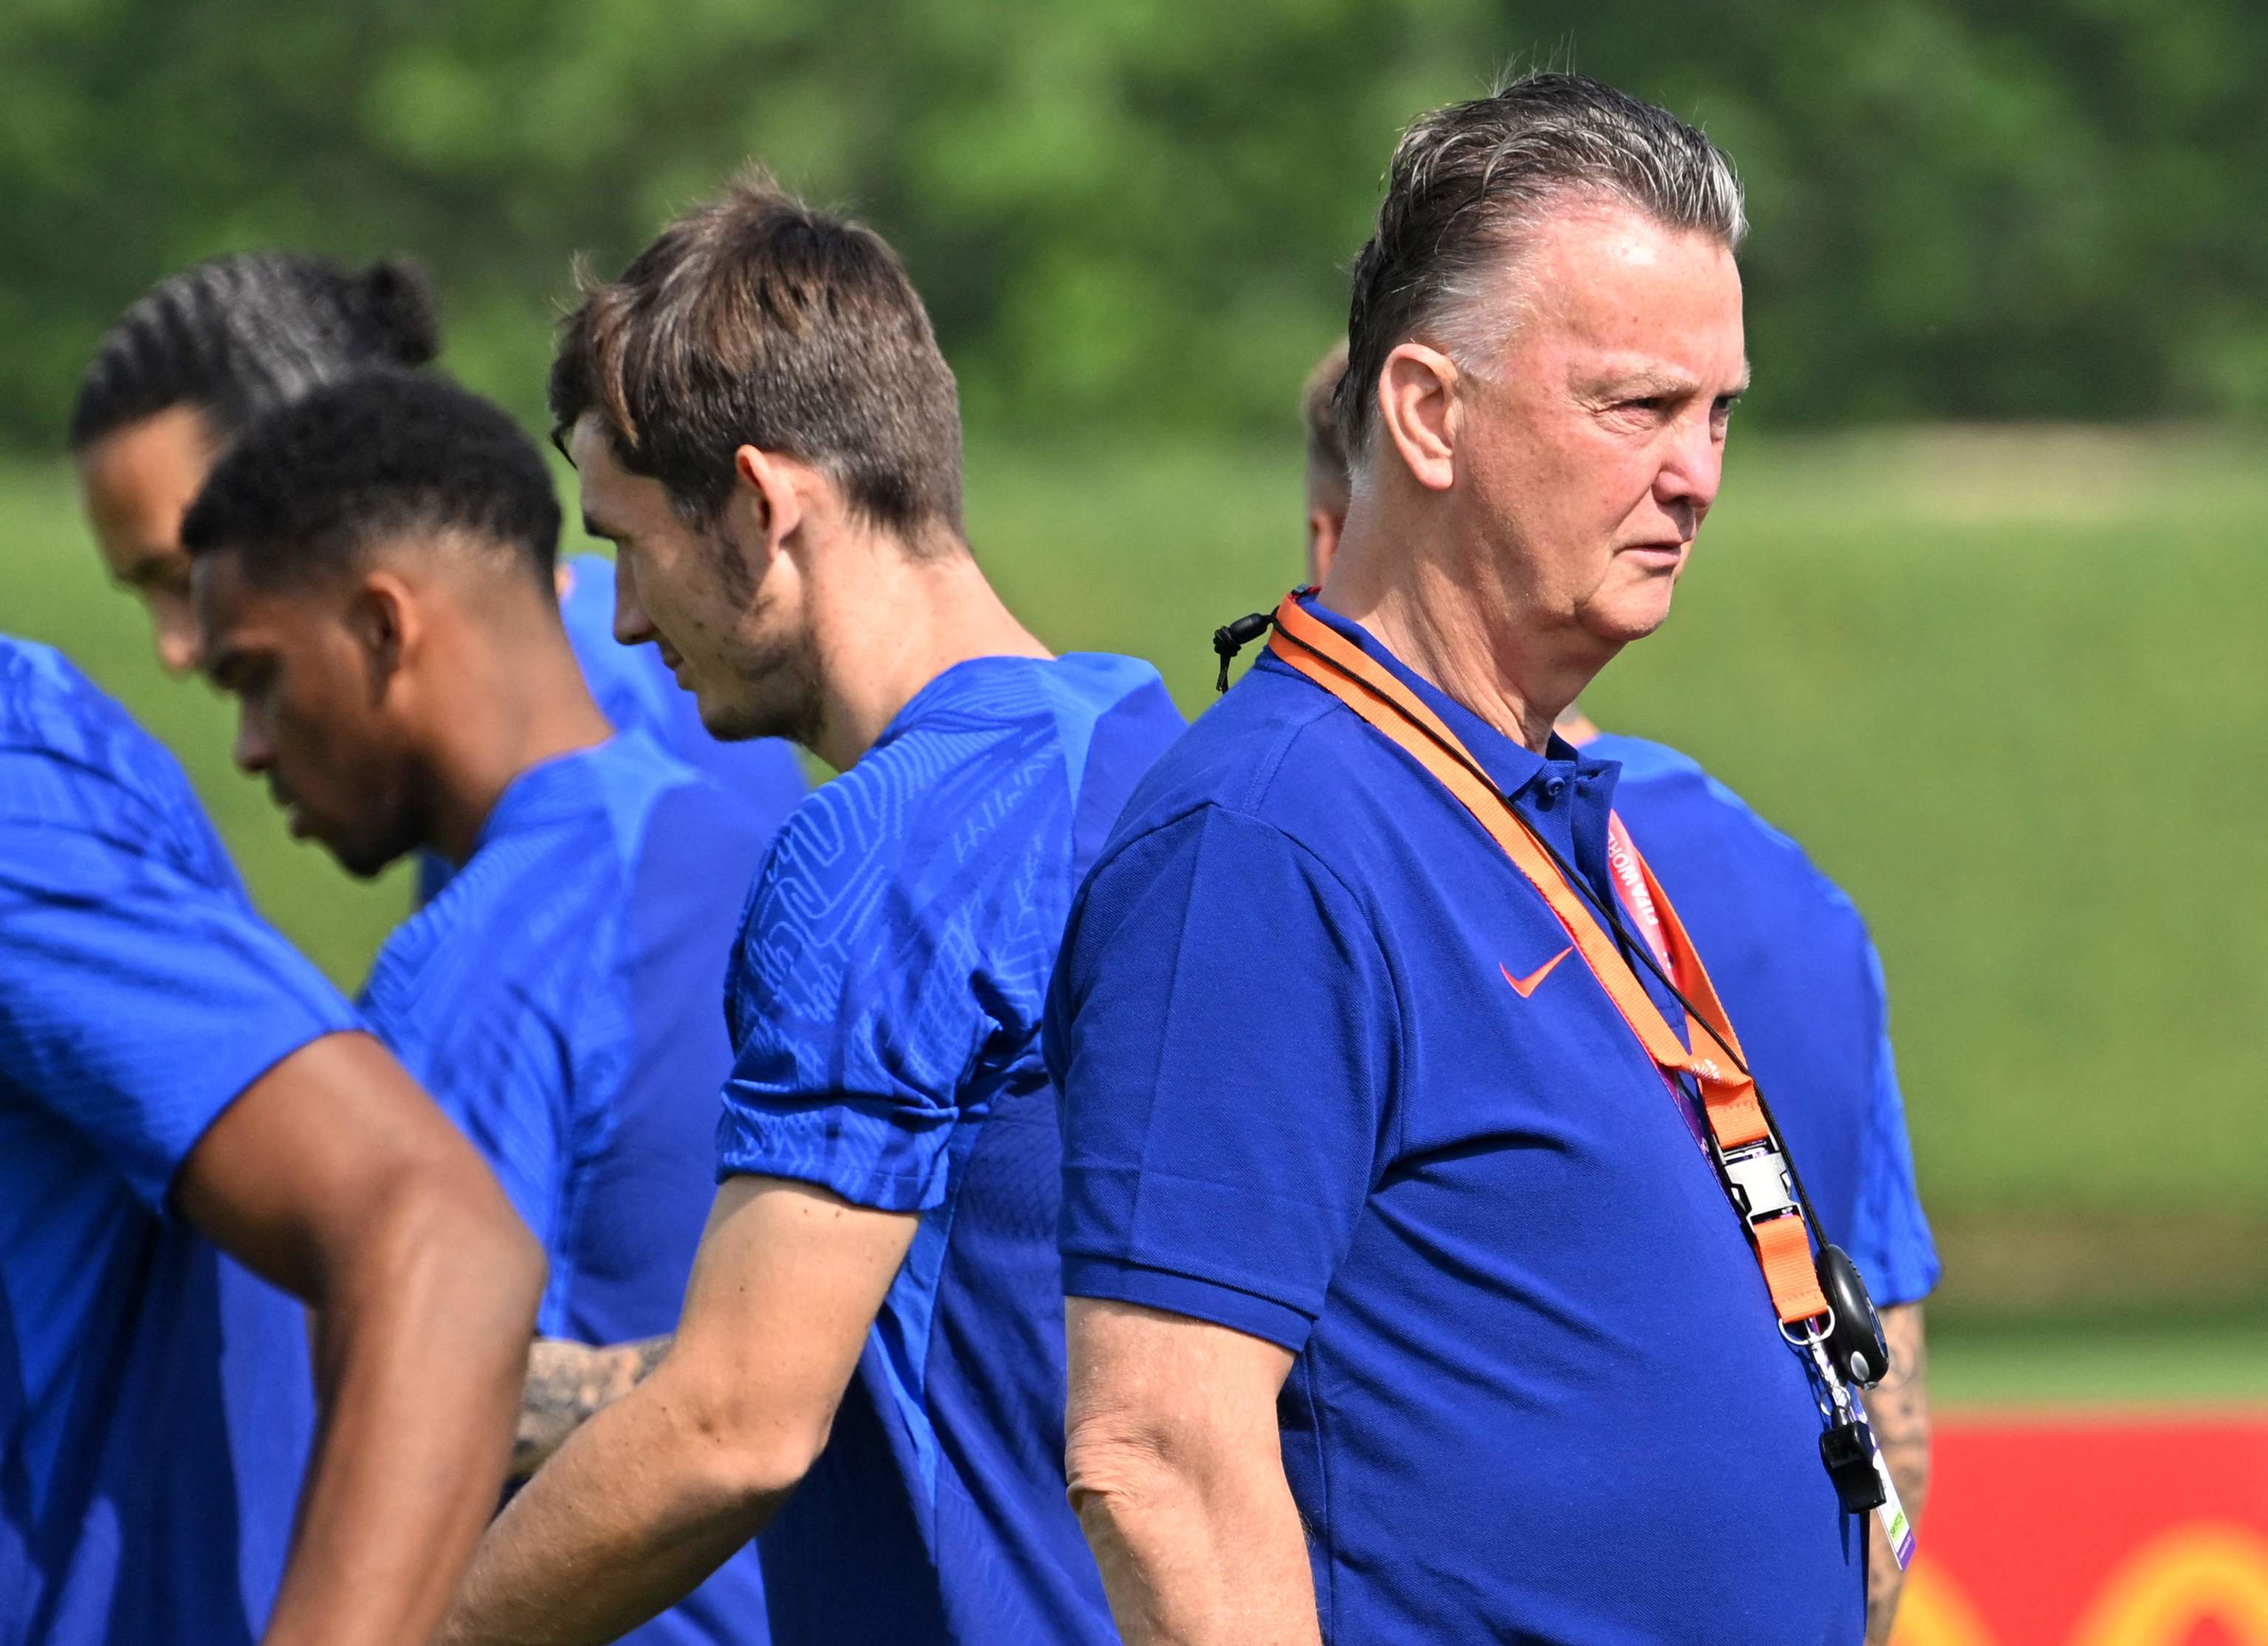 They go Gaal, in a training.